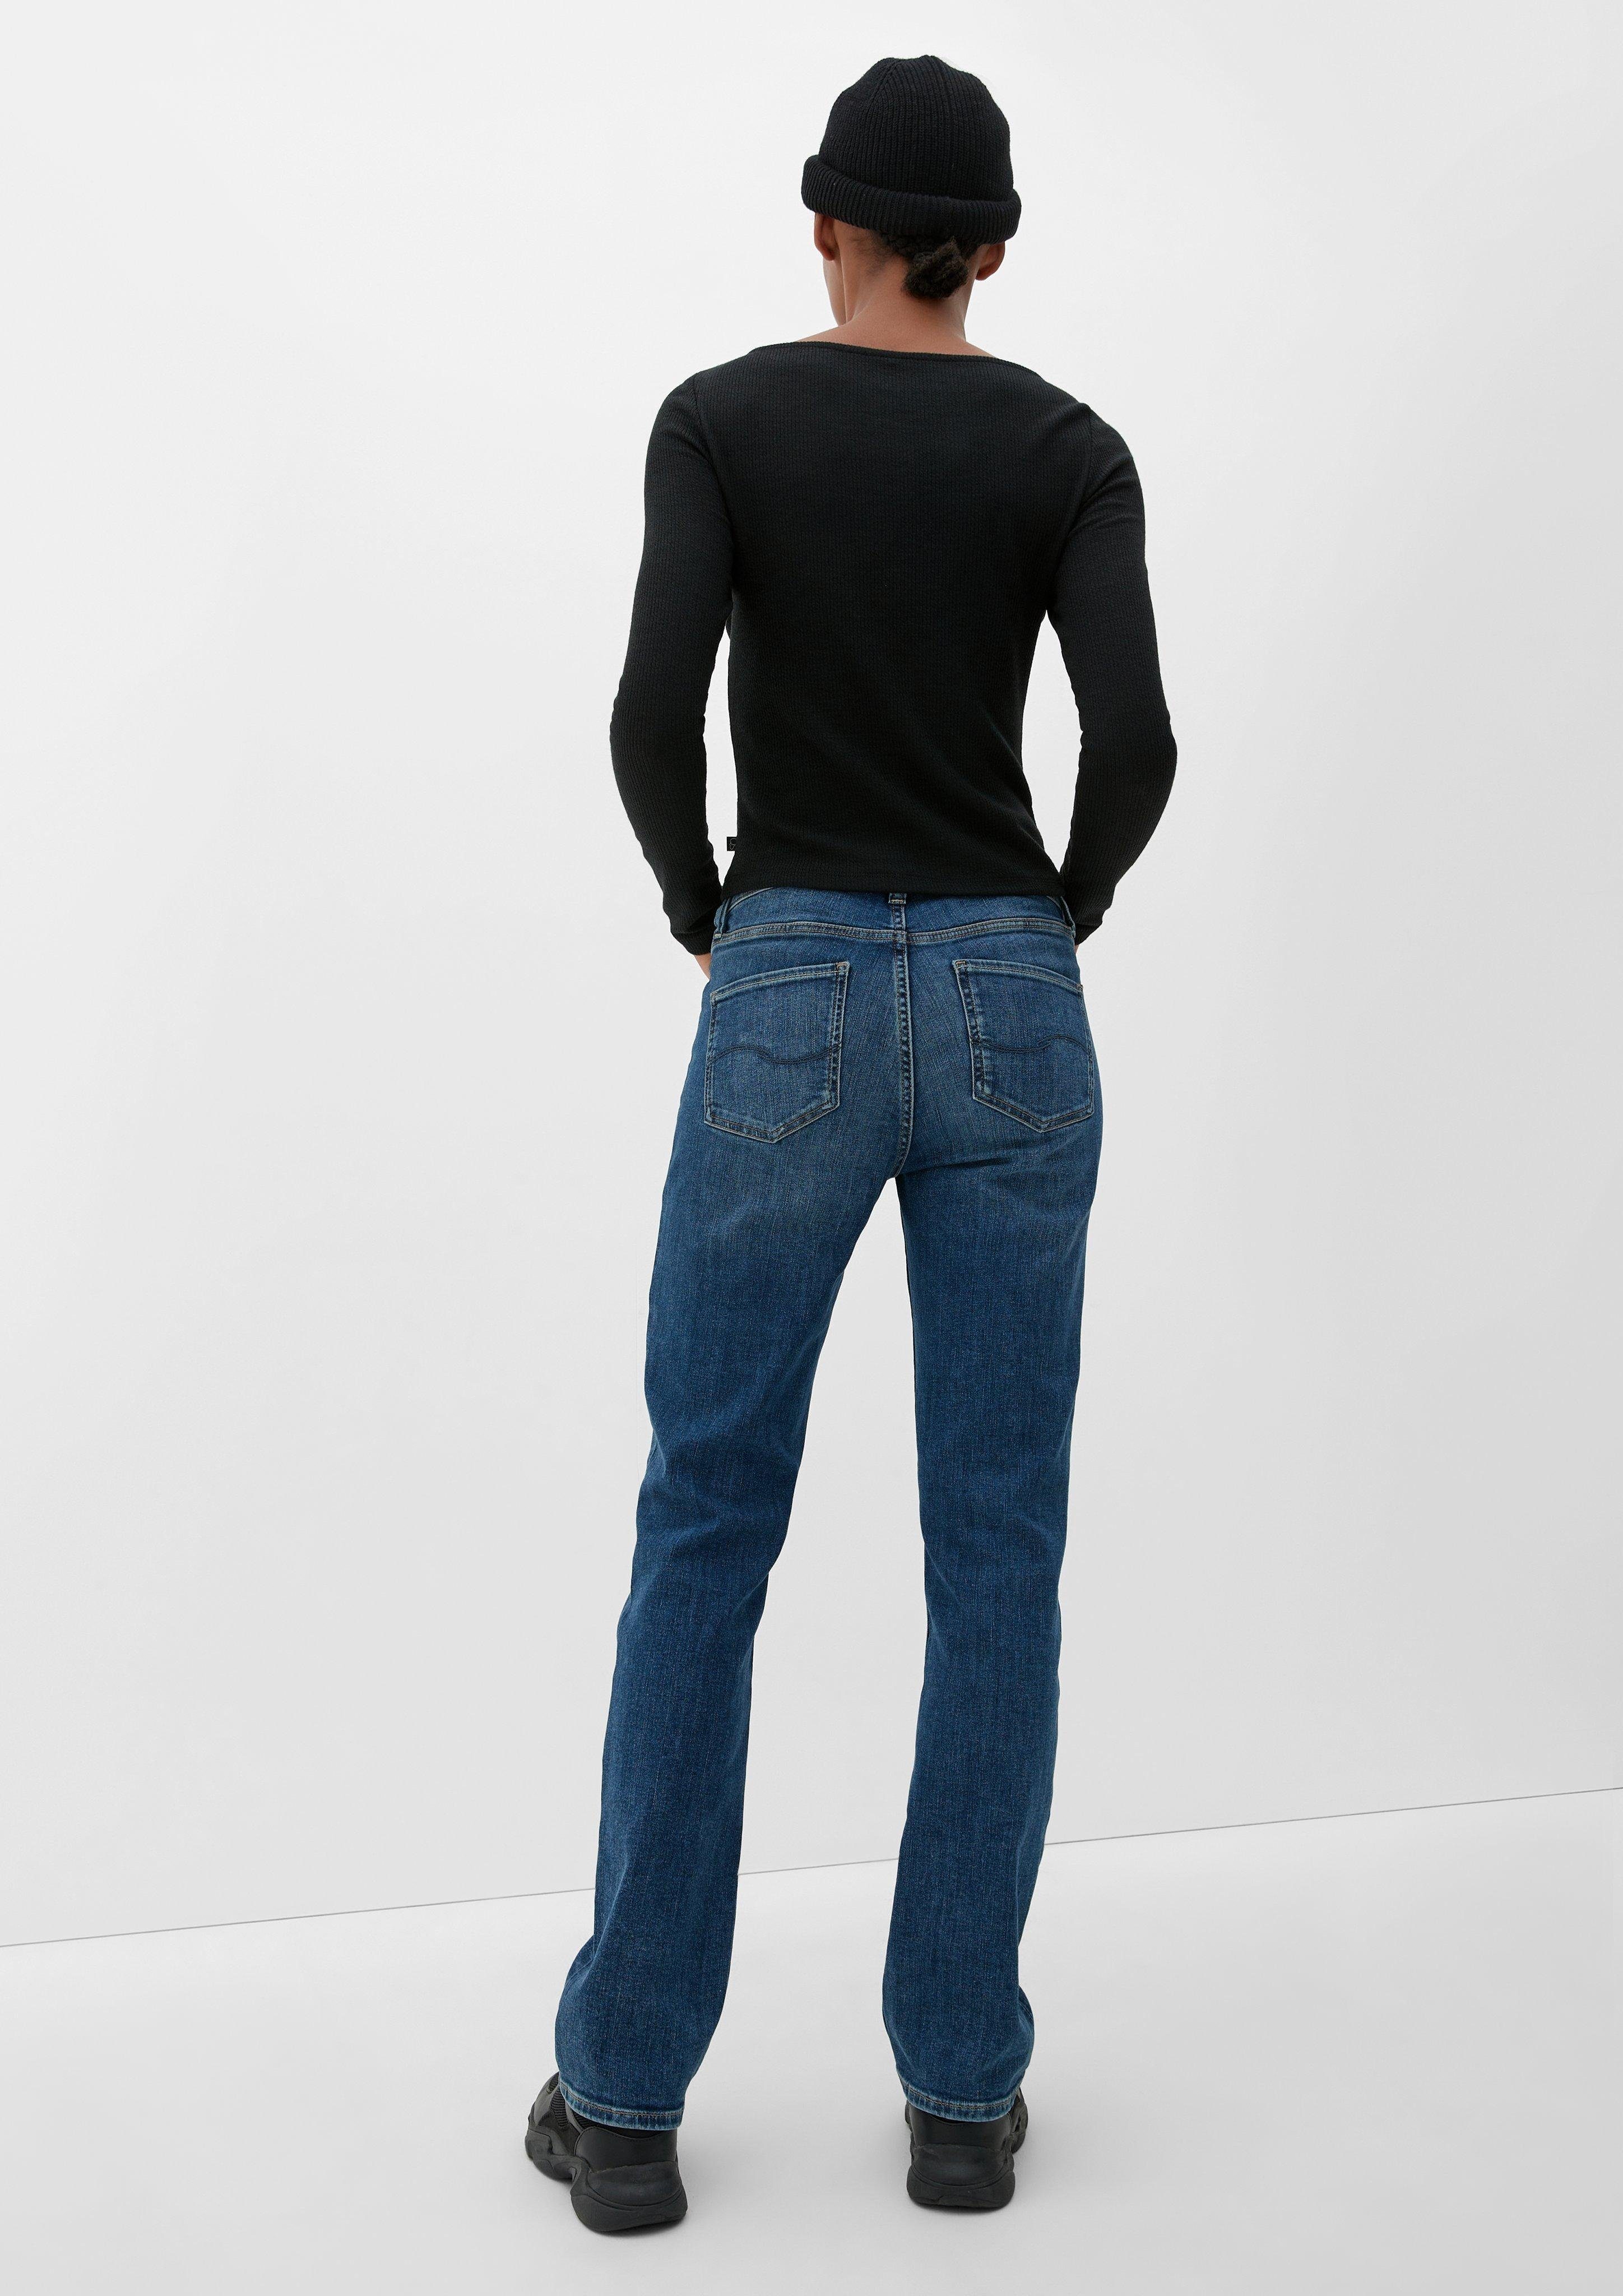 / QS Jeans Catie / Fit Straight High / Rise Leg Stoffhose Slim